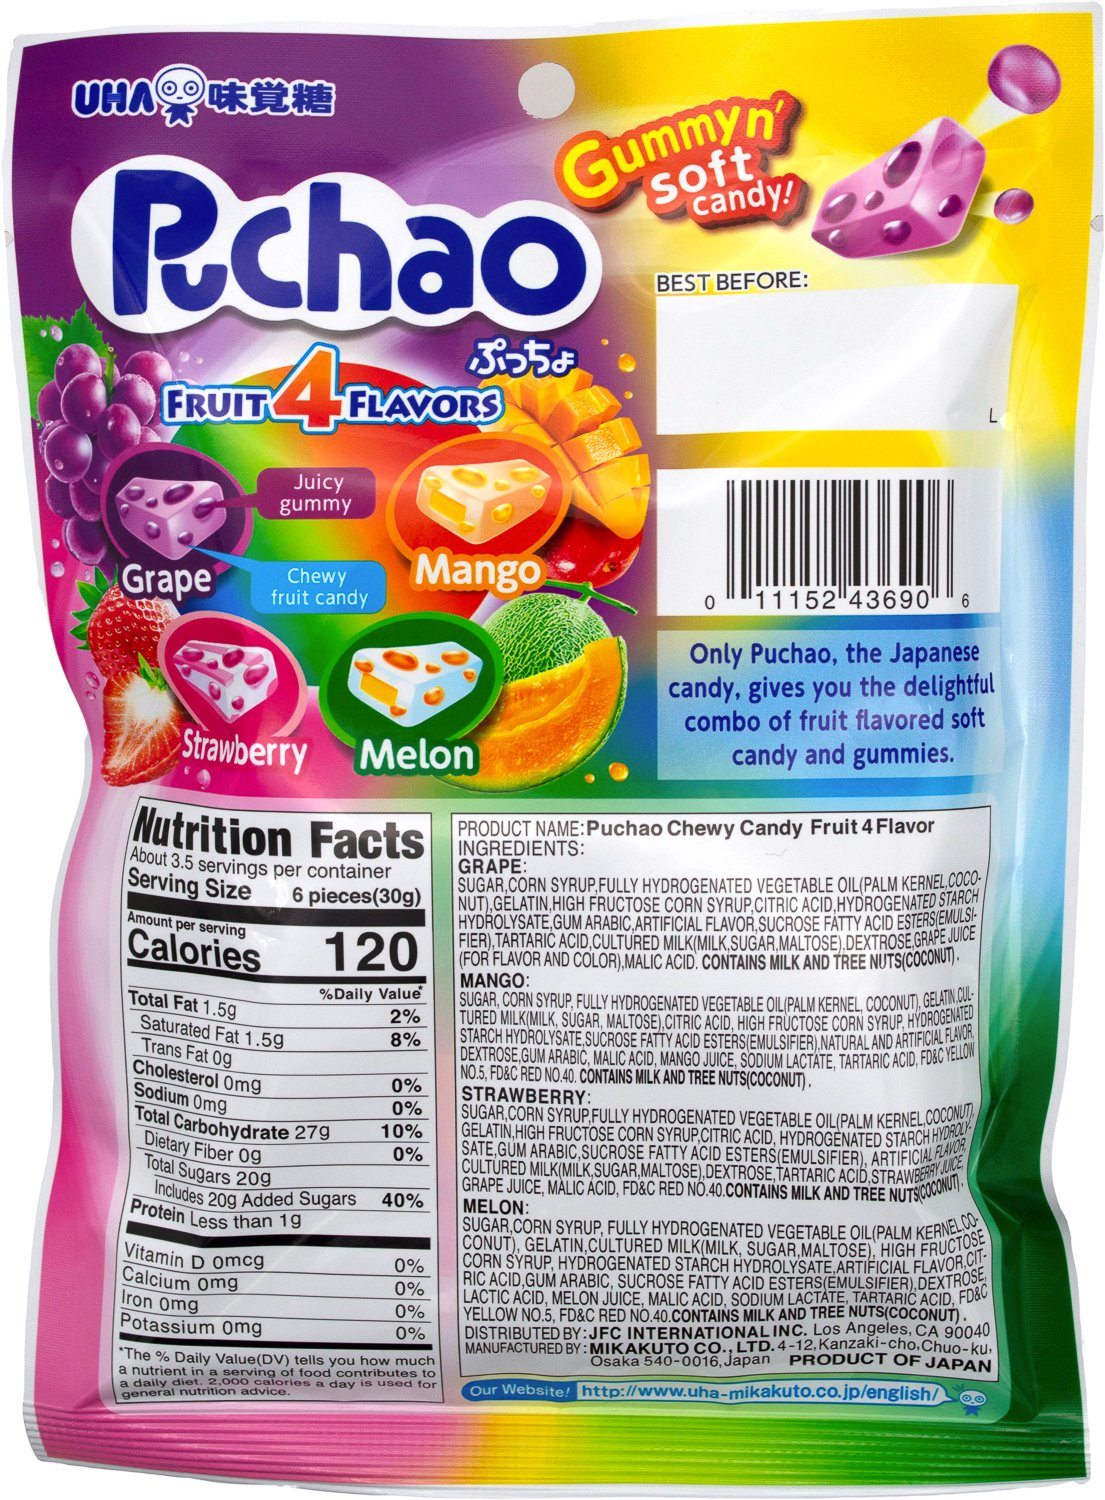 Puchao Gummy n' Soft Candy Puchao 